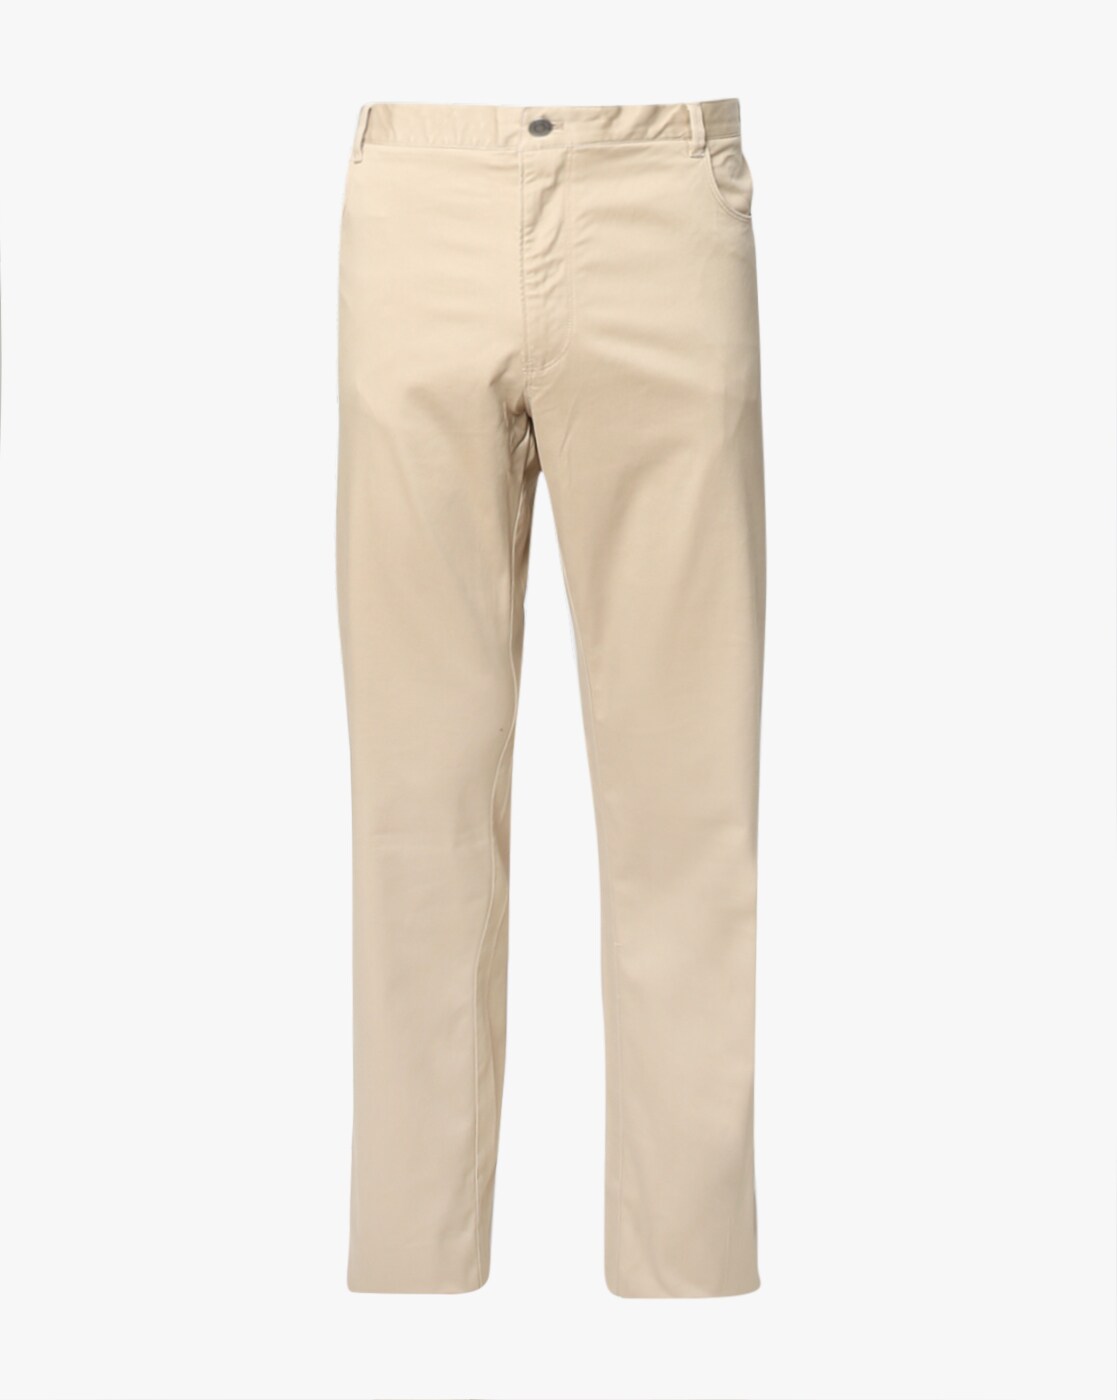 WOODLAND Trousers and Pants  Buy WOODLAND Bottoms Pants and TrousersRed  36 Online  Nykaa Fashion